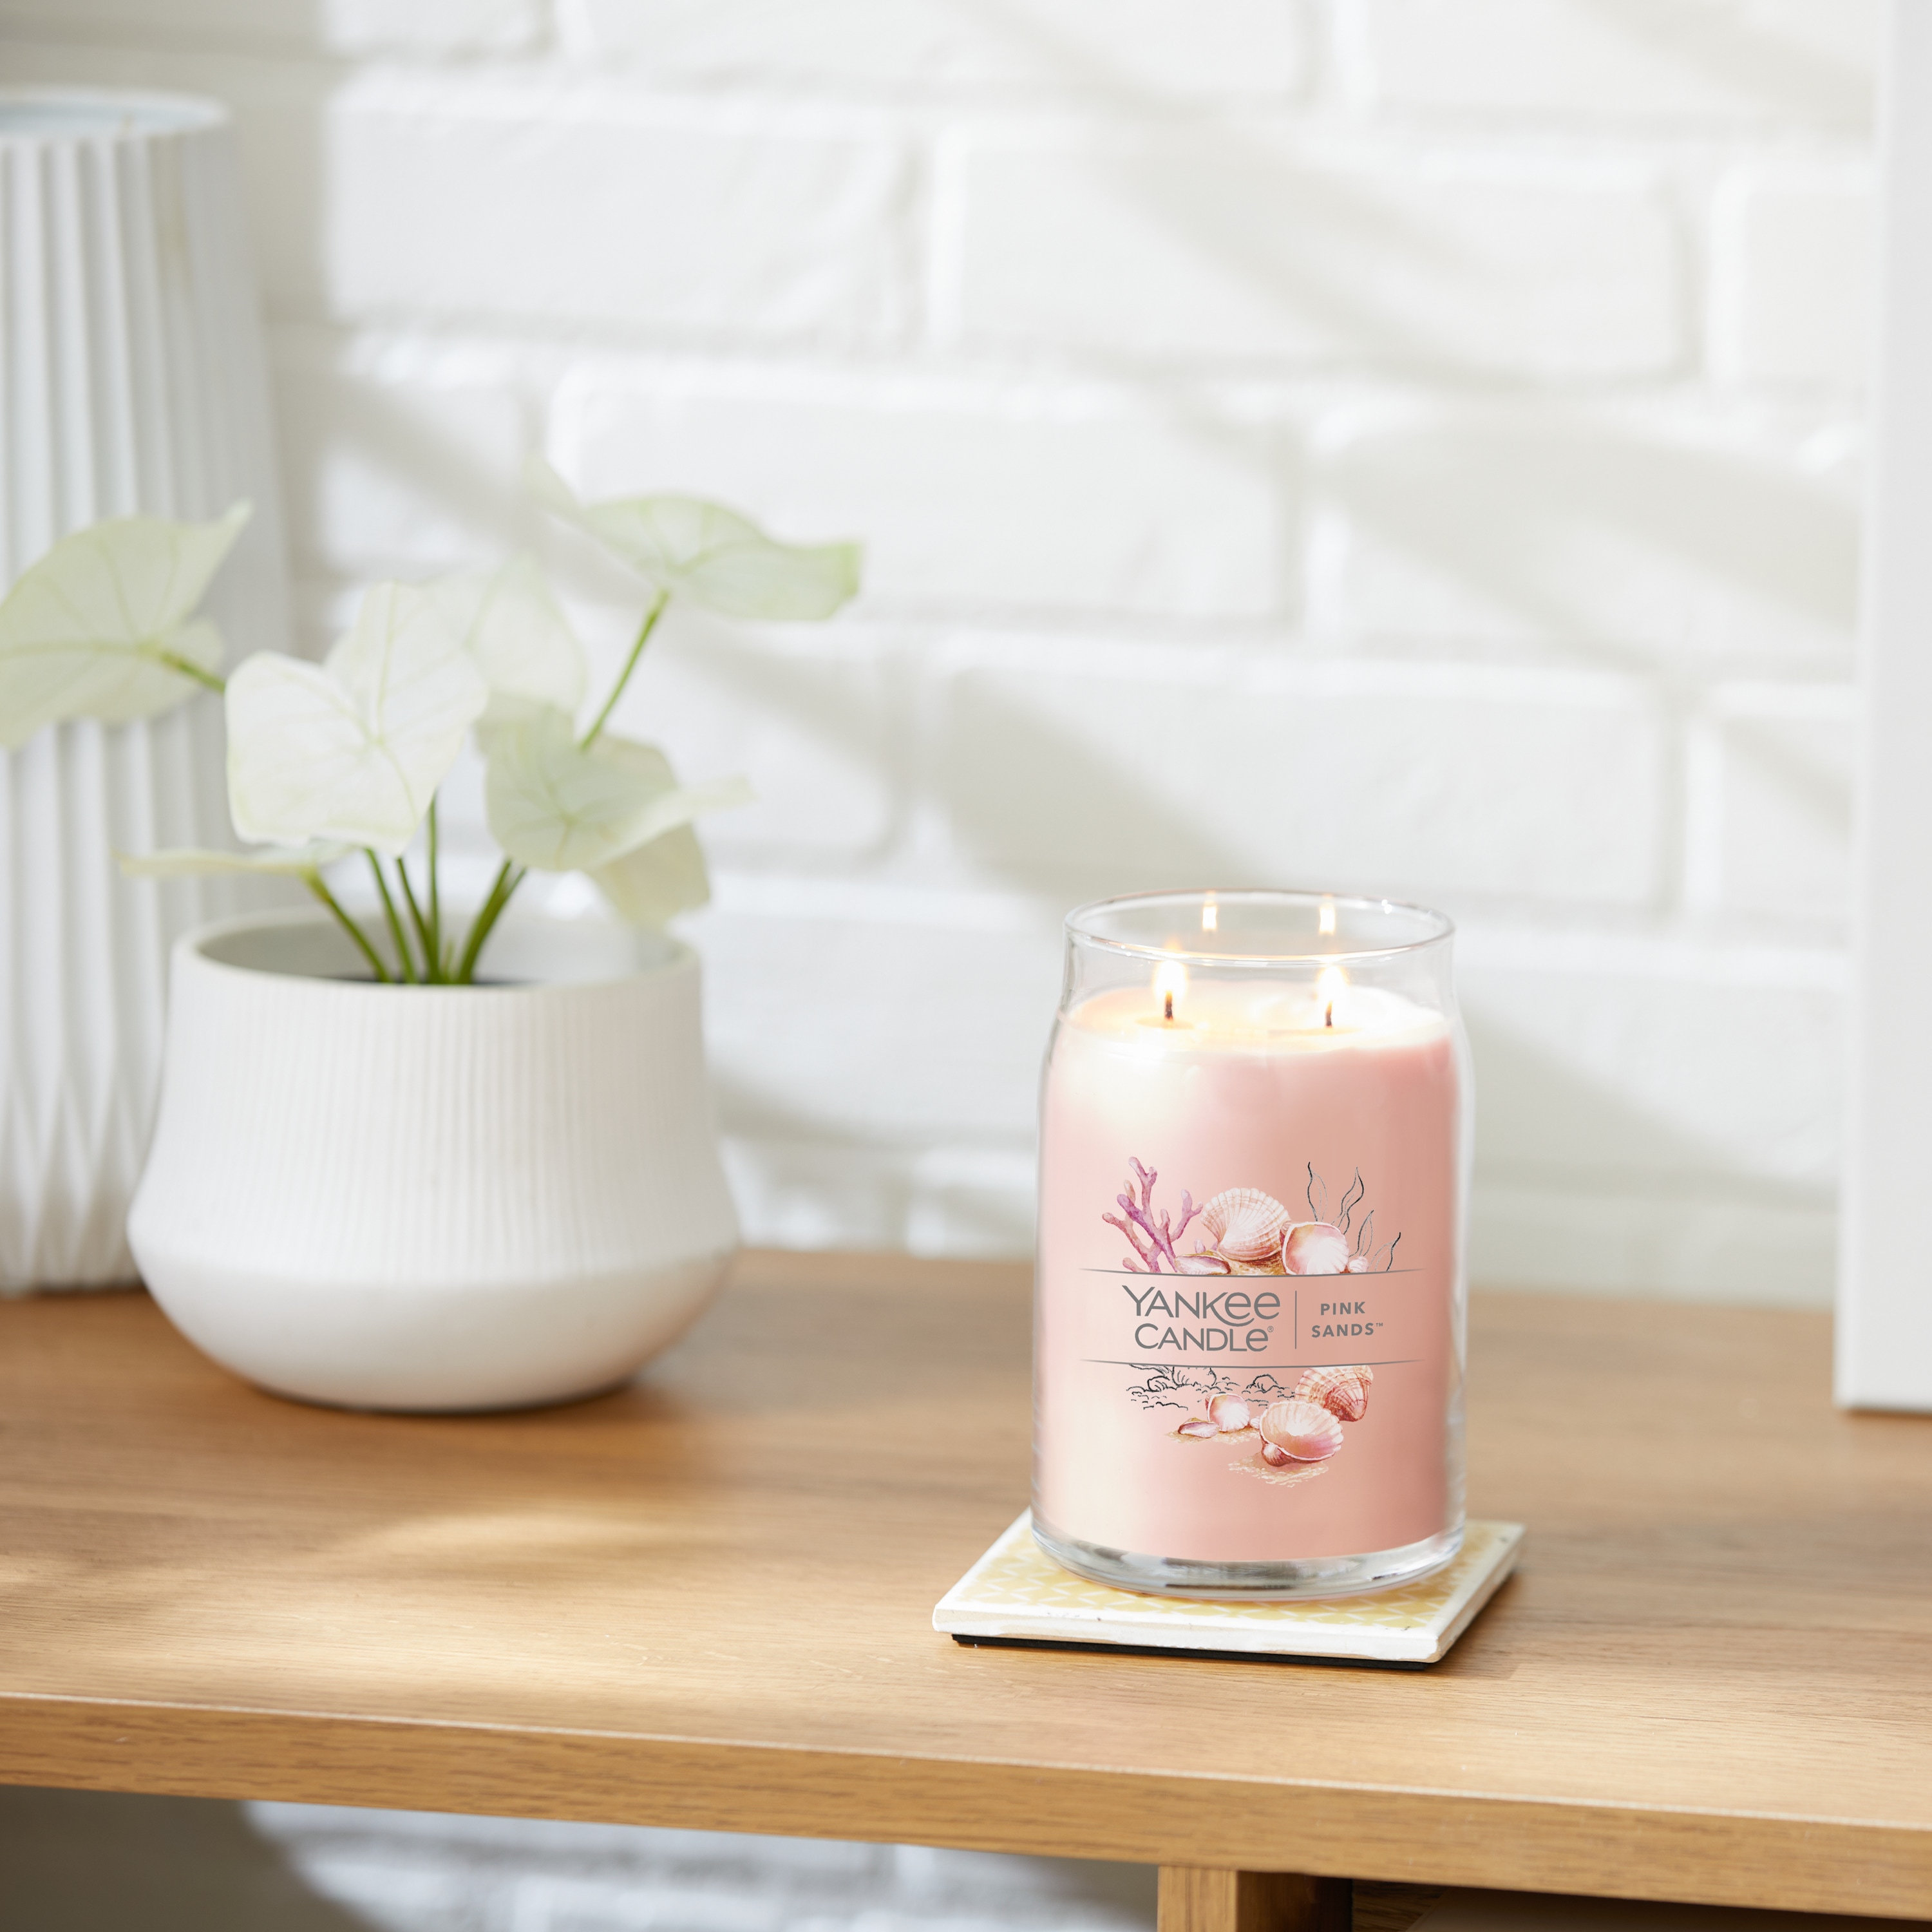 Yankee Candle® Pink Sands™ Best Mom Ever 3-Wick Candle, 1 ct - Smith's Food  and Drug